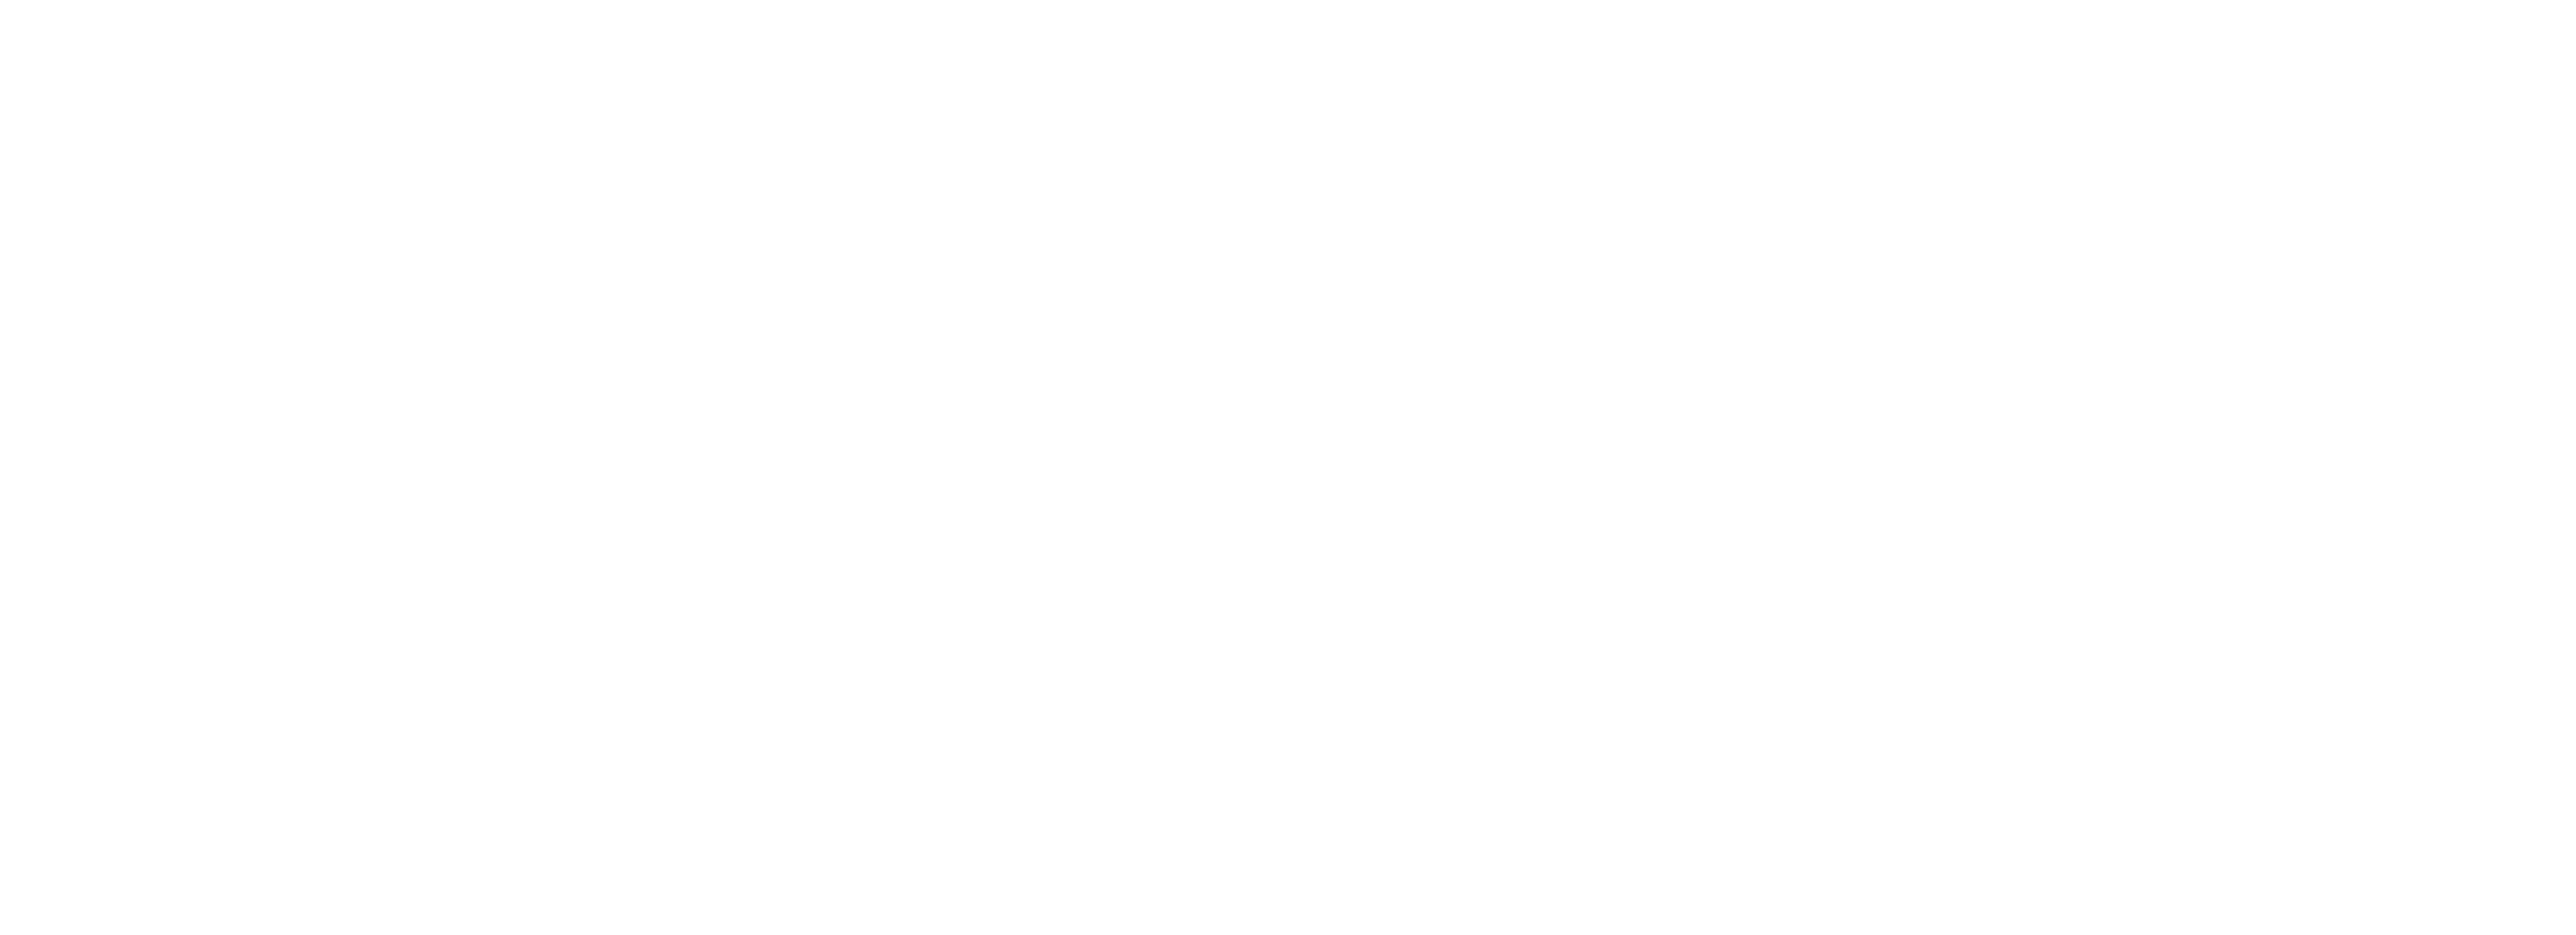 Logo of kitchener featuring a stylized depiction of a kitchen utensil and paint drip on a green background. Toronto Caribana Carnival: Ultimate Guide to Caribana Festival Events